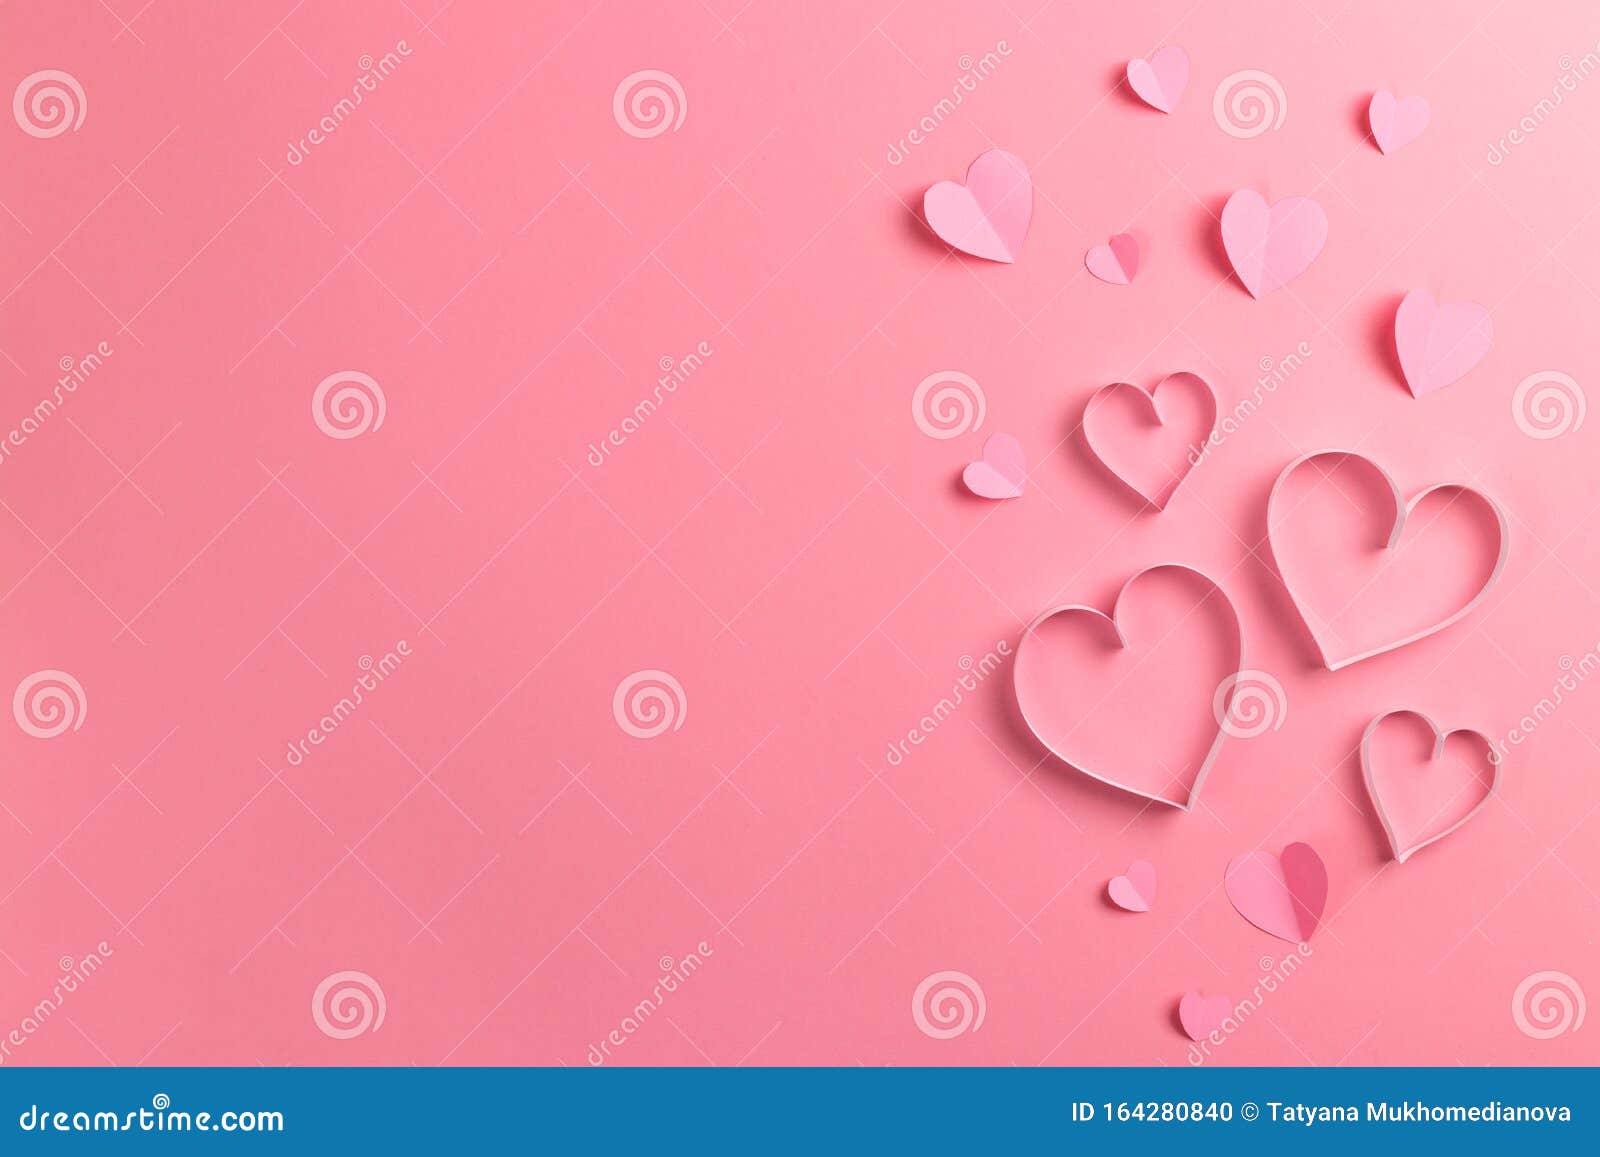 composition for valentine`s day february 14th. delicate pink background and pink hearts cut out of paper. greeting card